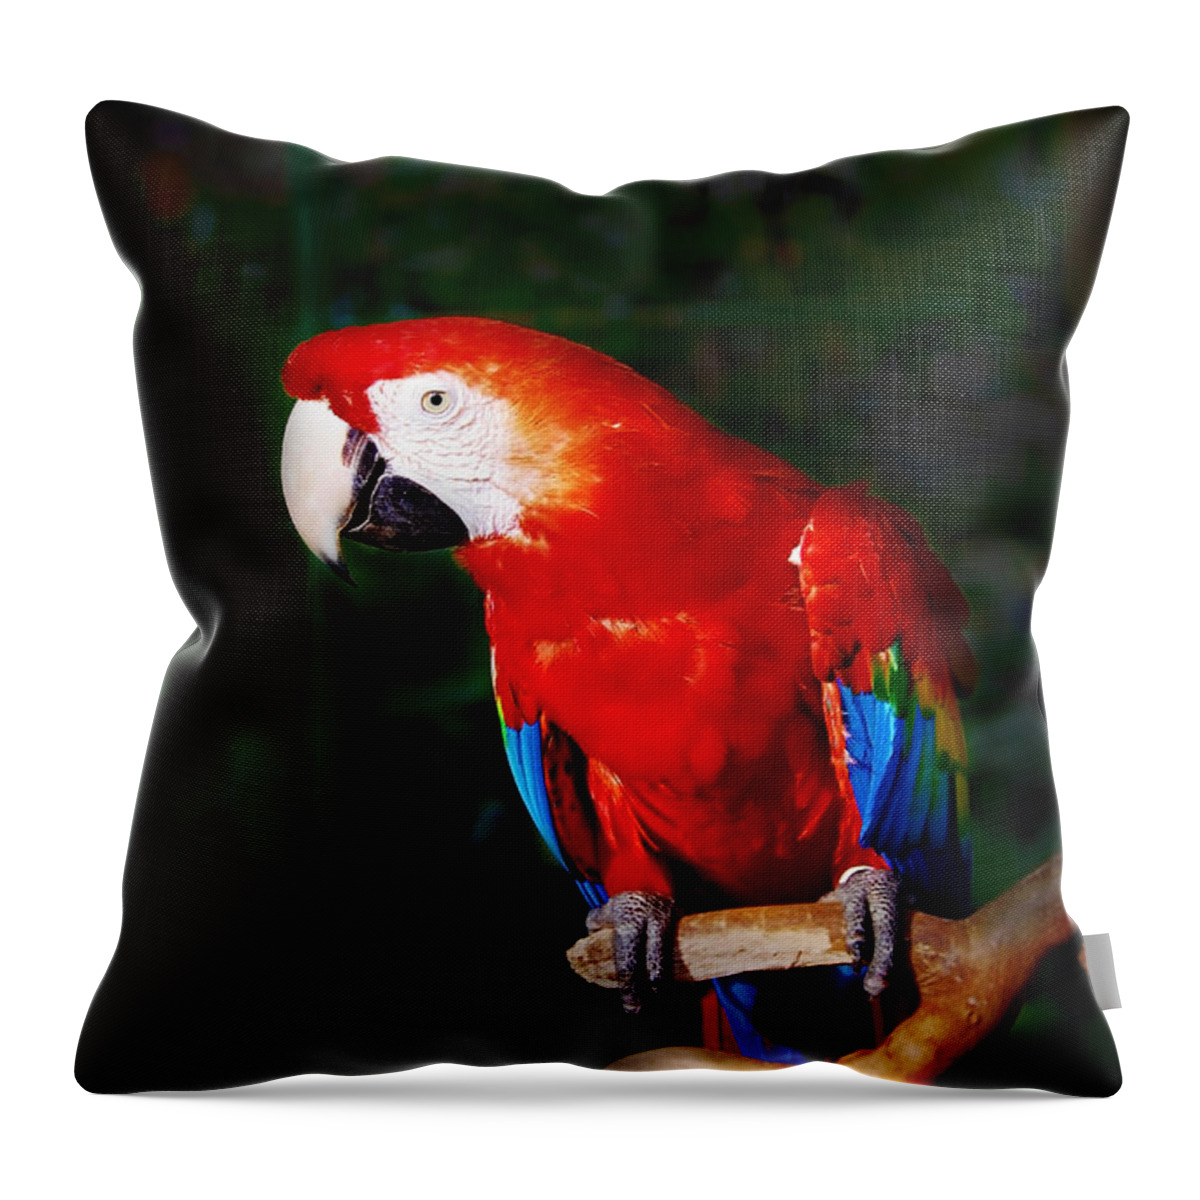 Bird Throw Pillow featuring the photograph Birdie by Charuhas Images